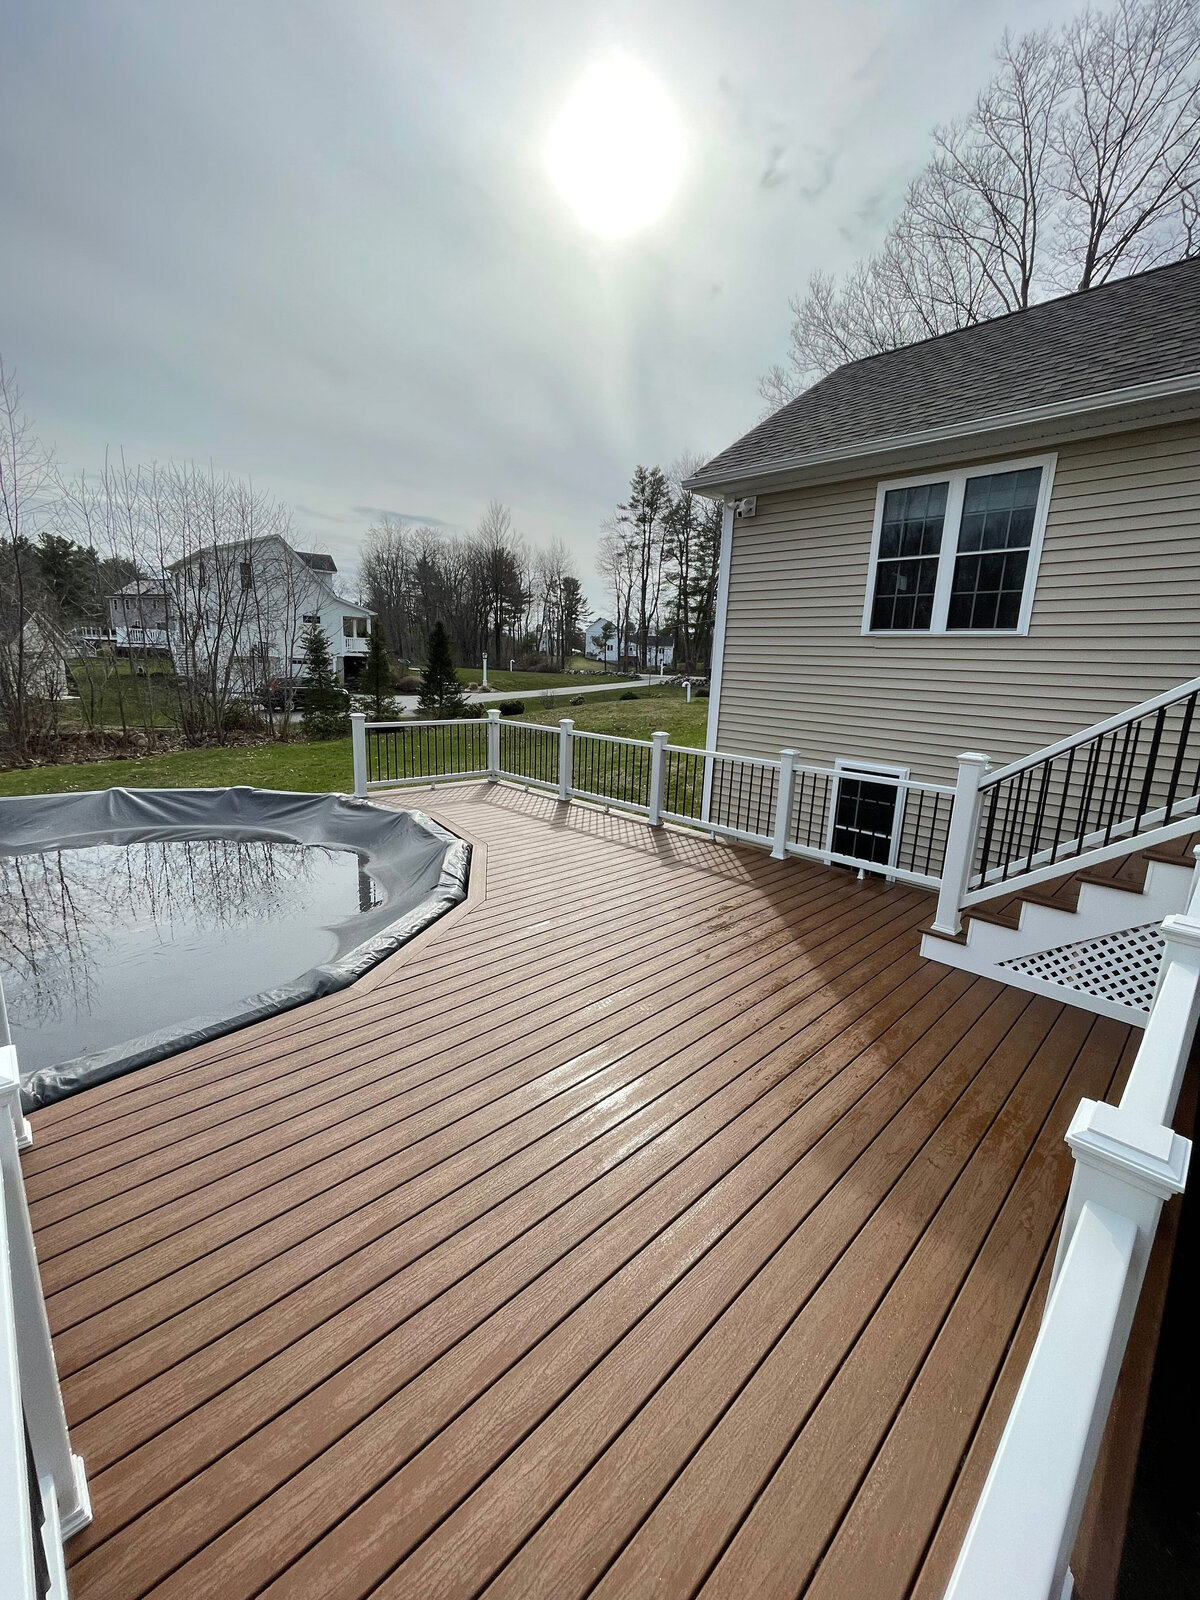 A beautiful dark brown deck with white railings and trellis stairs facing around a pool done by a Shrewsbury MA Deck Builder